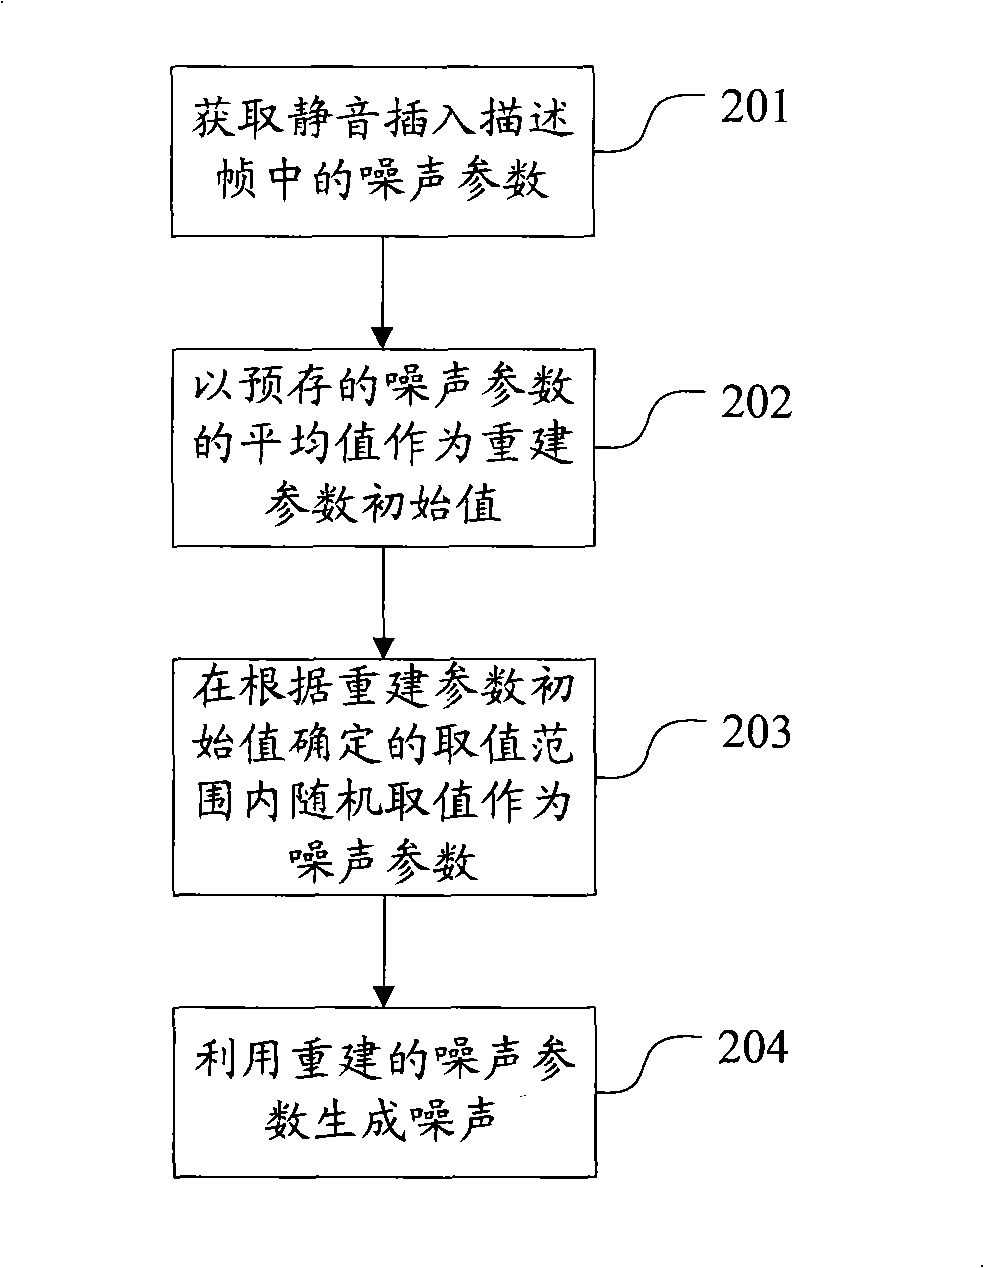 Noise generating apparatus and method